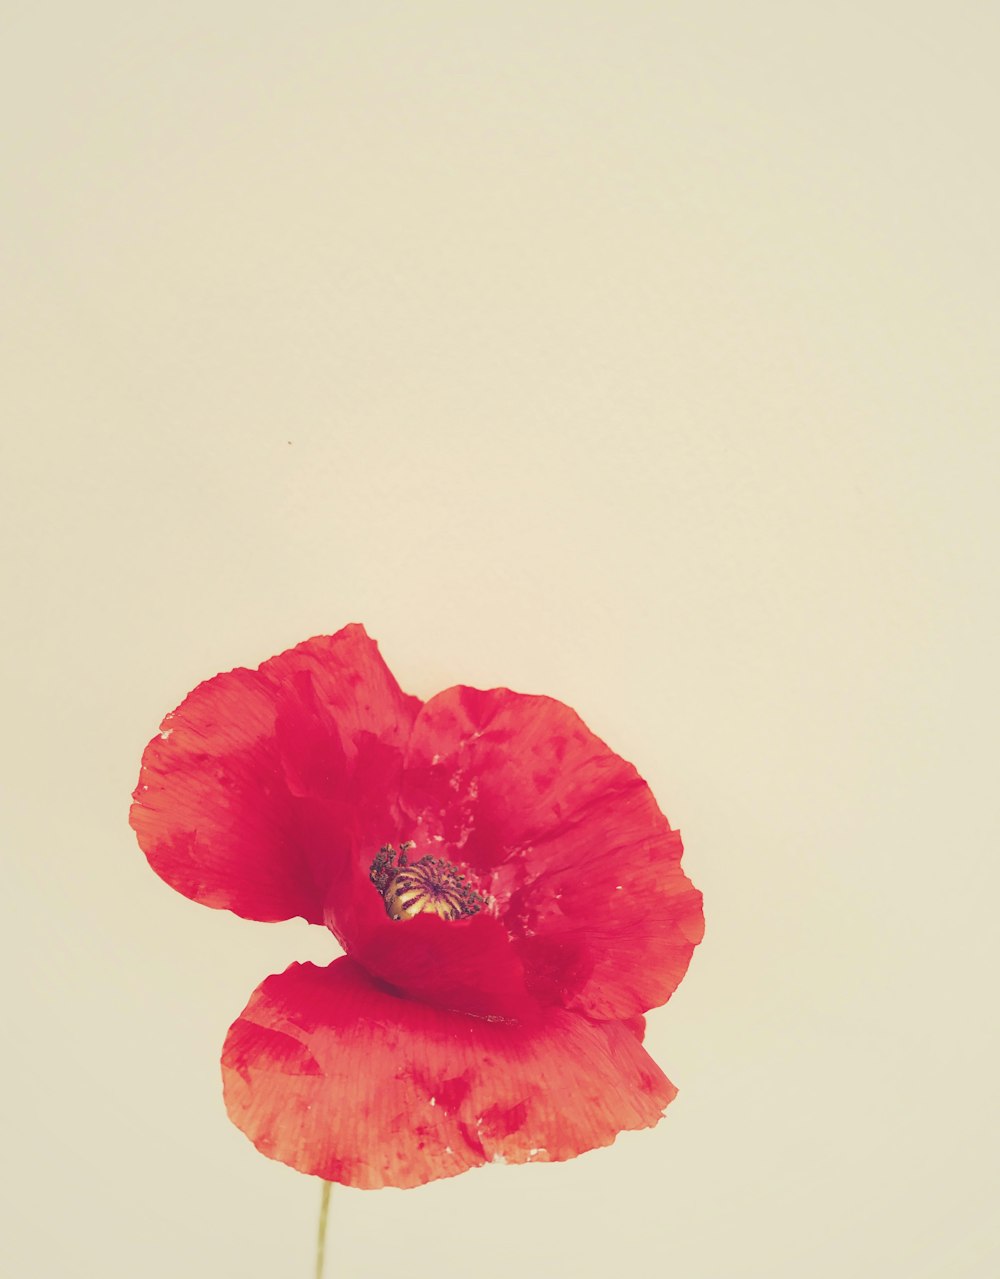 a single red flower on a white background